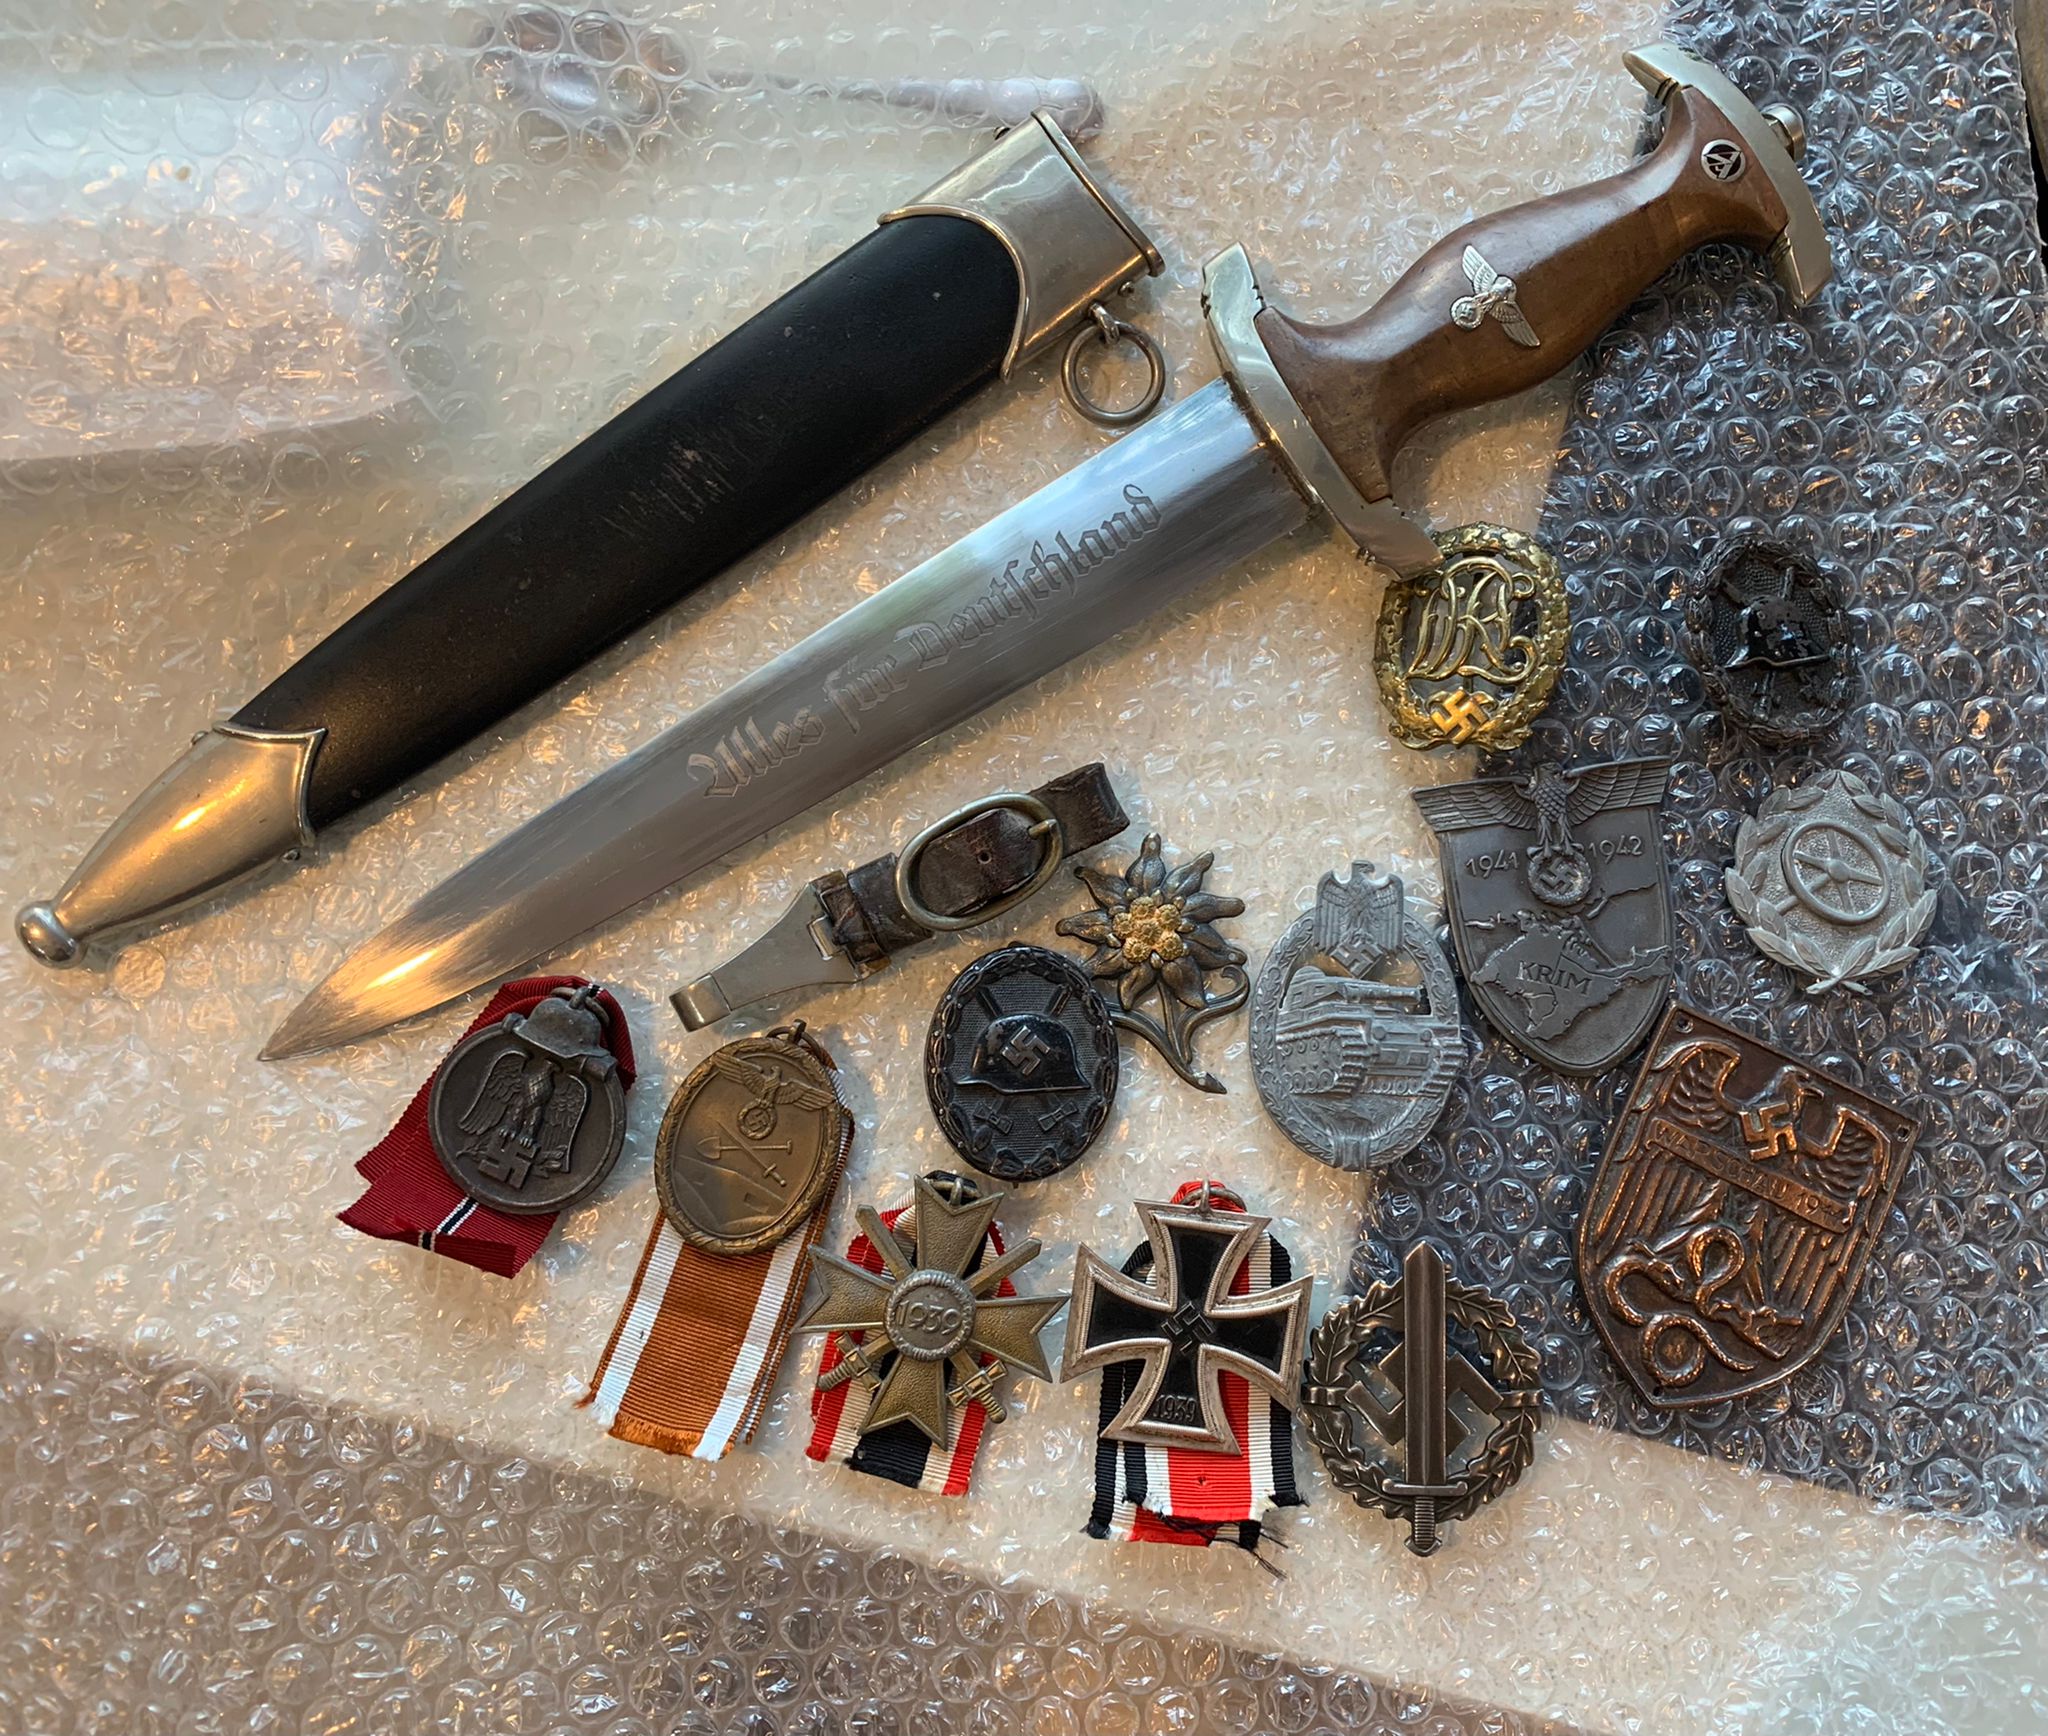 How to get free appraisal for militaria